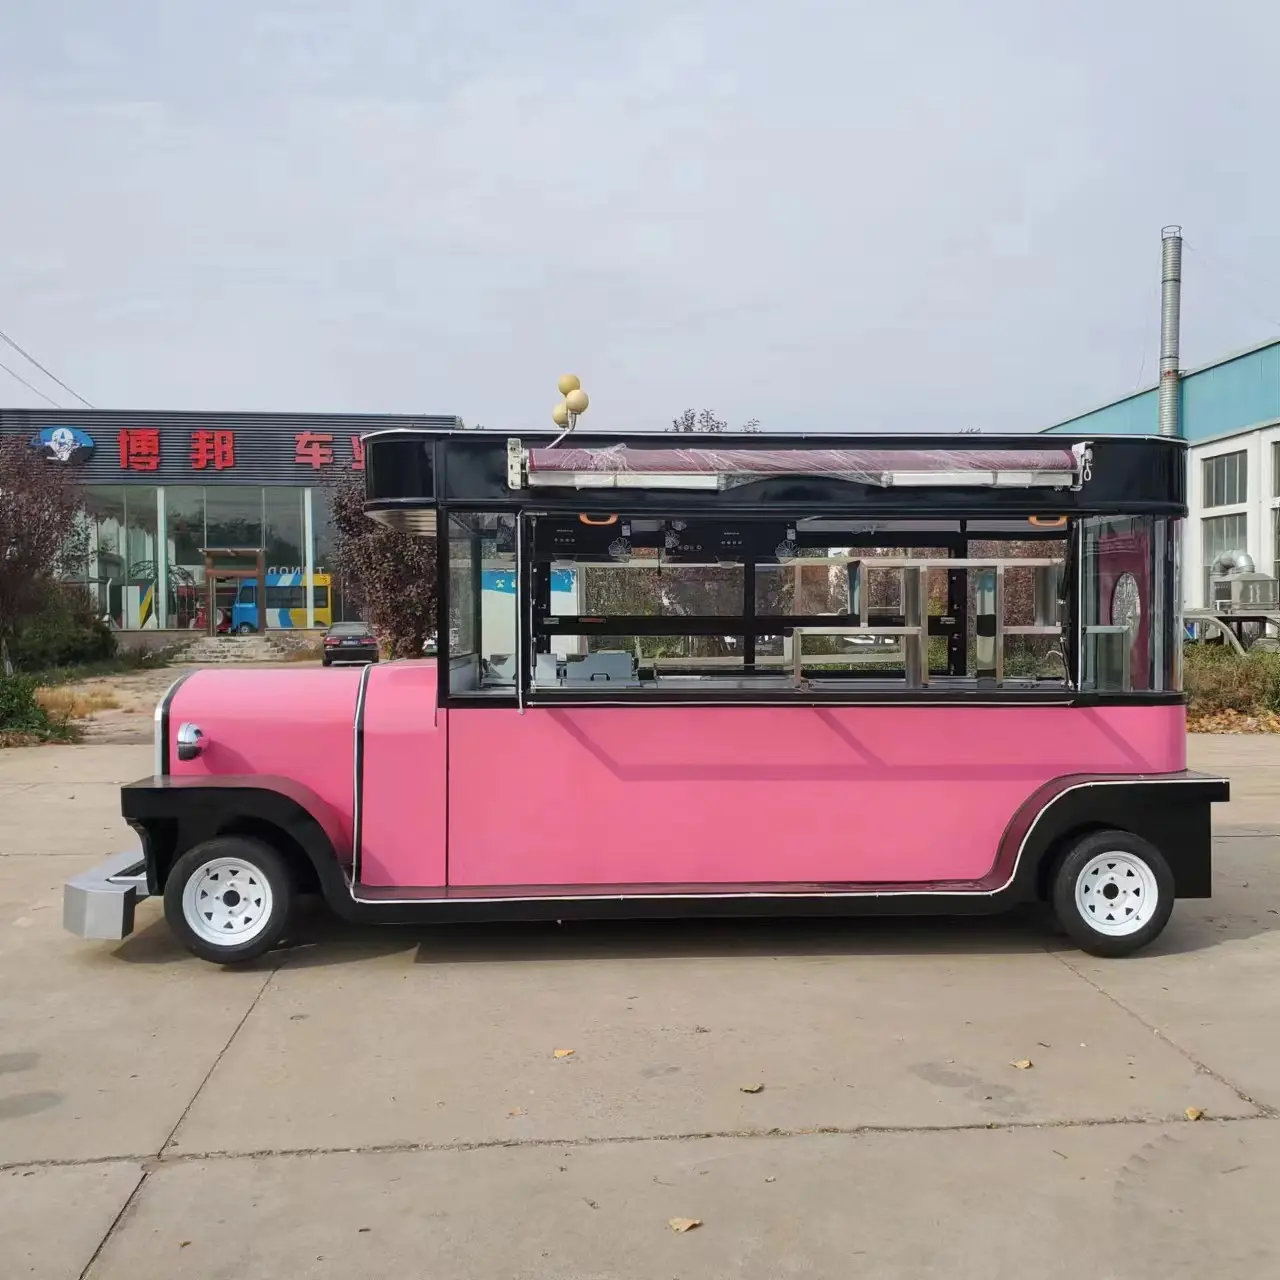 Mobile hot dog snacks, fast food trucks, coffee shops, ice cream trucks, bus suppliers, electric dining cars